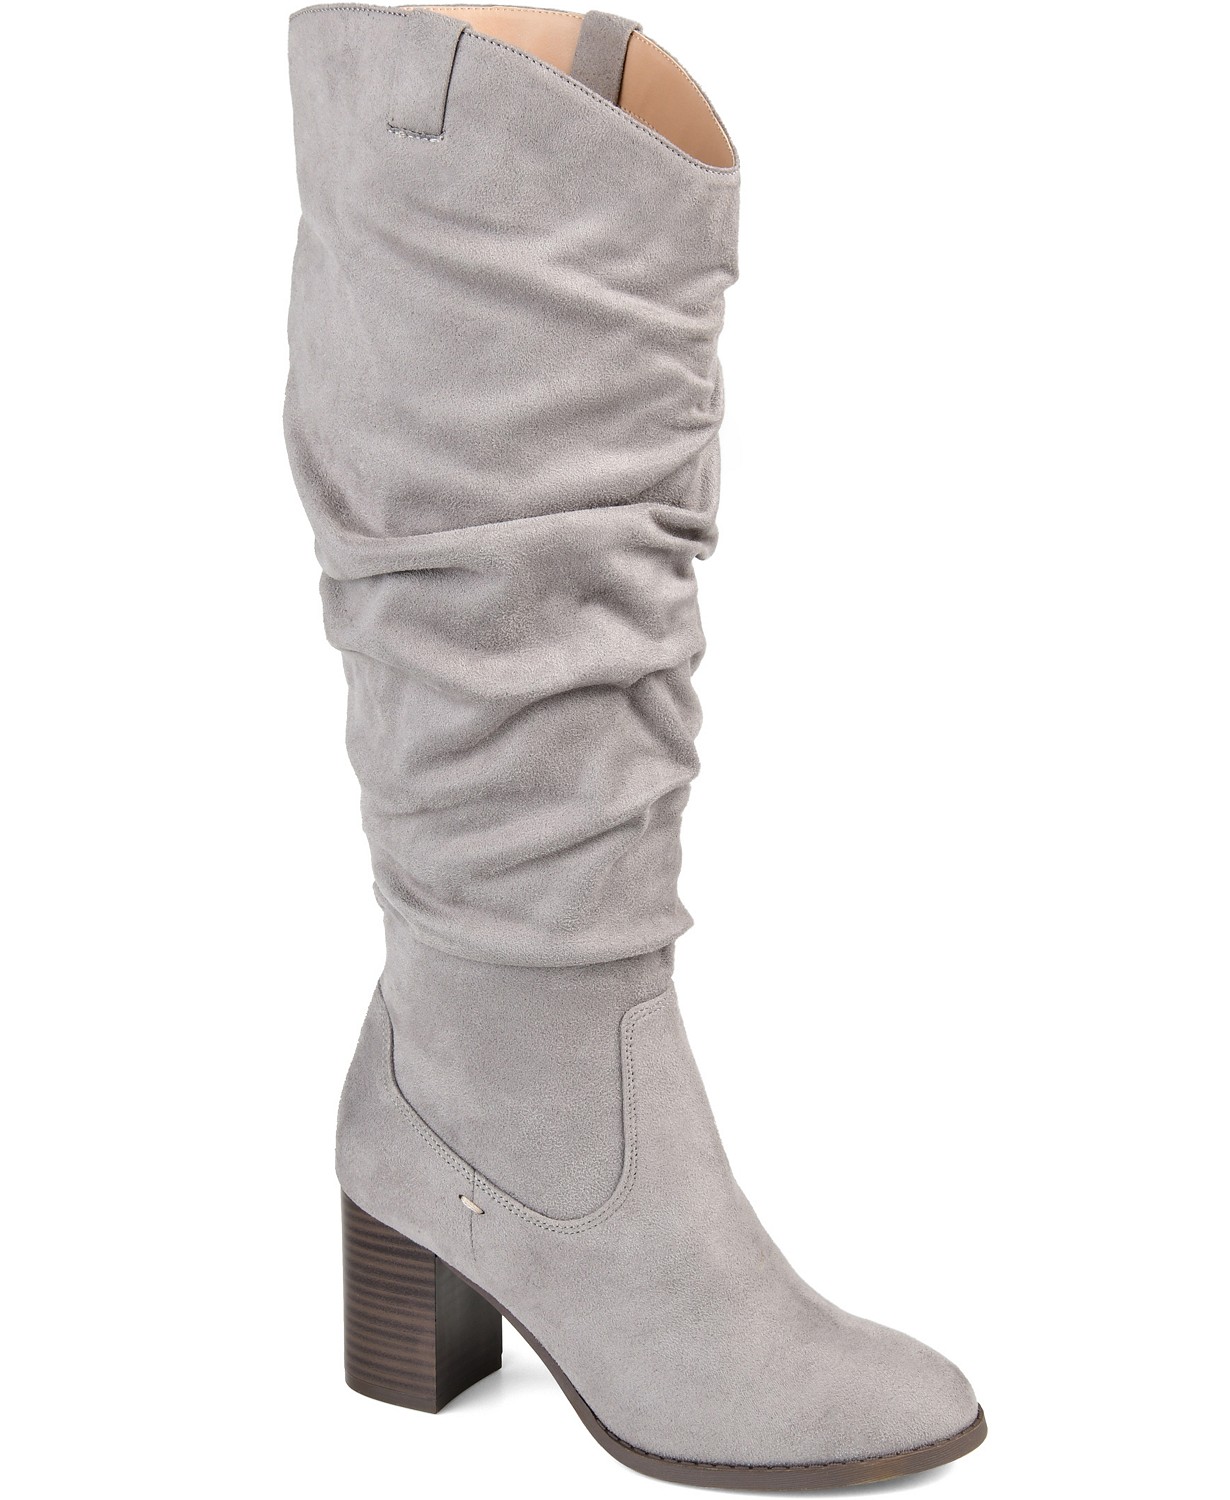 www.couturepoint.com-journee-collection-womens-grey-aneil-boots